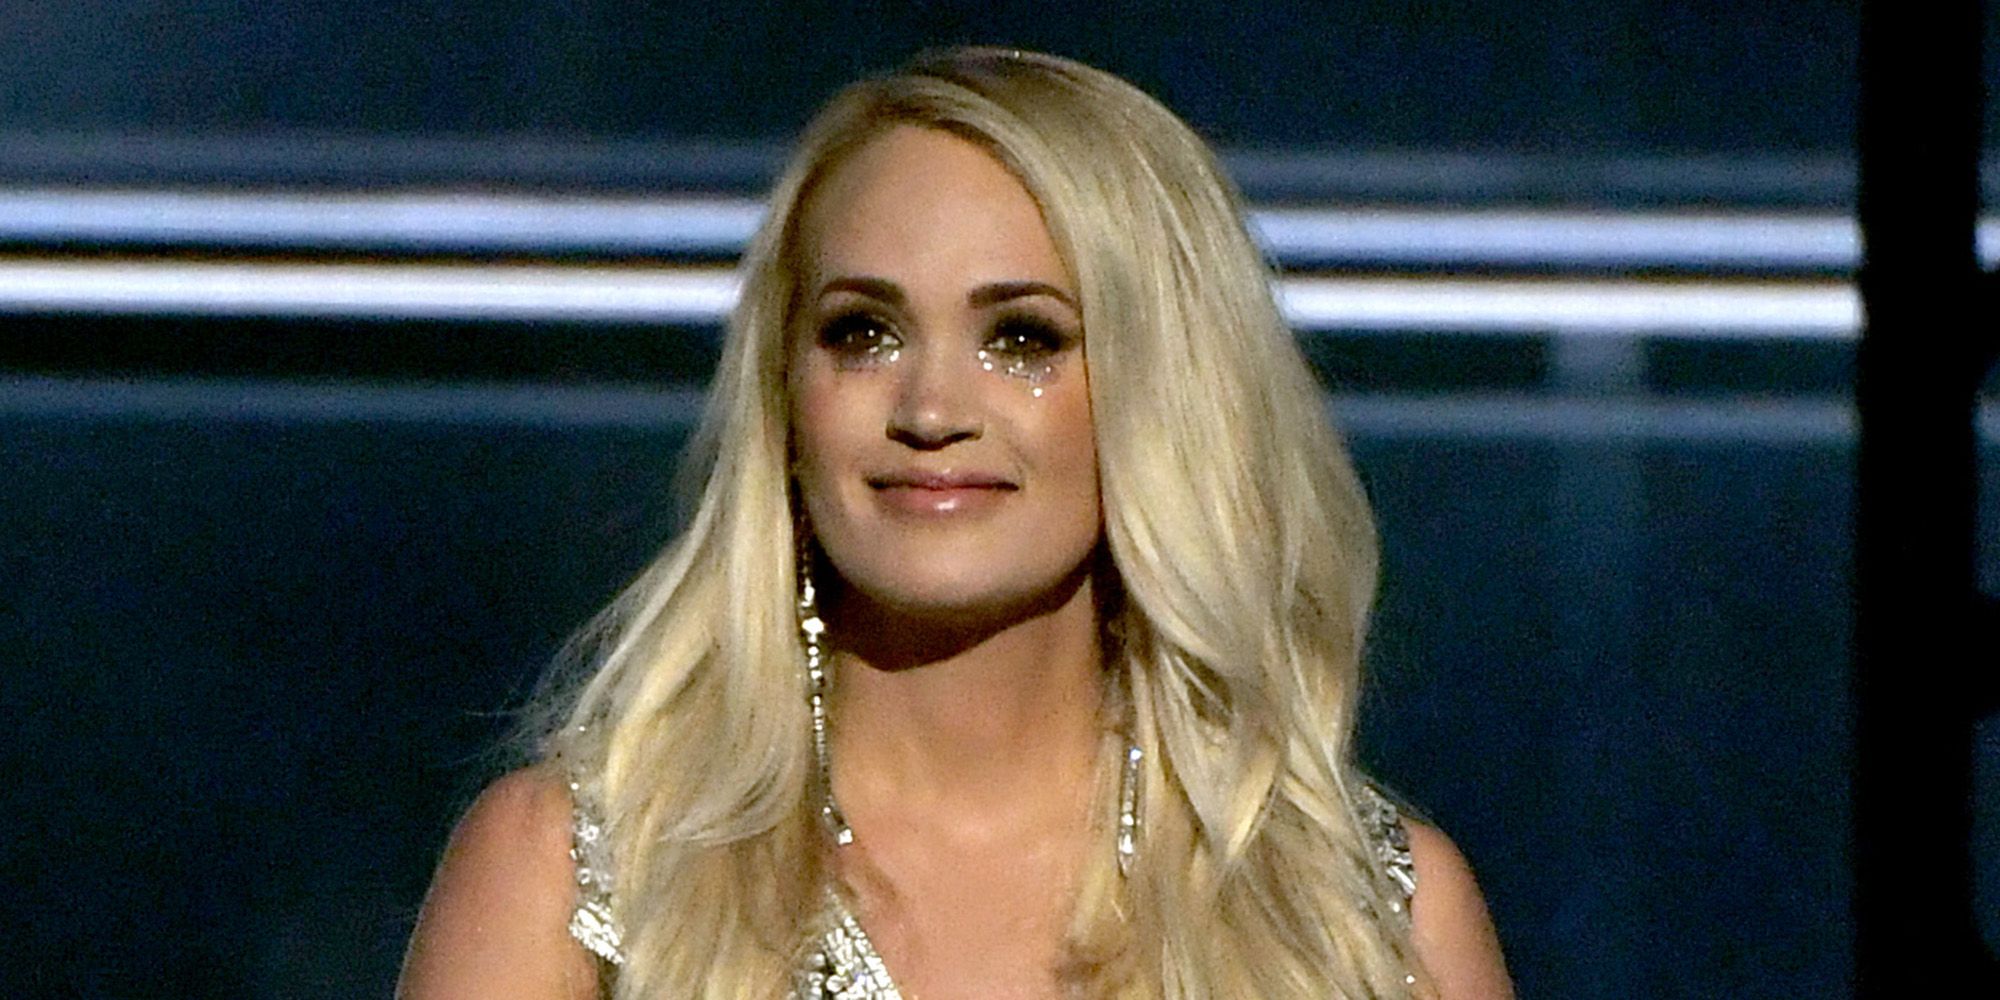 Carrie Underwood: Every Photo Since Her Accident